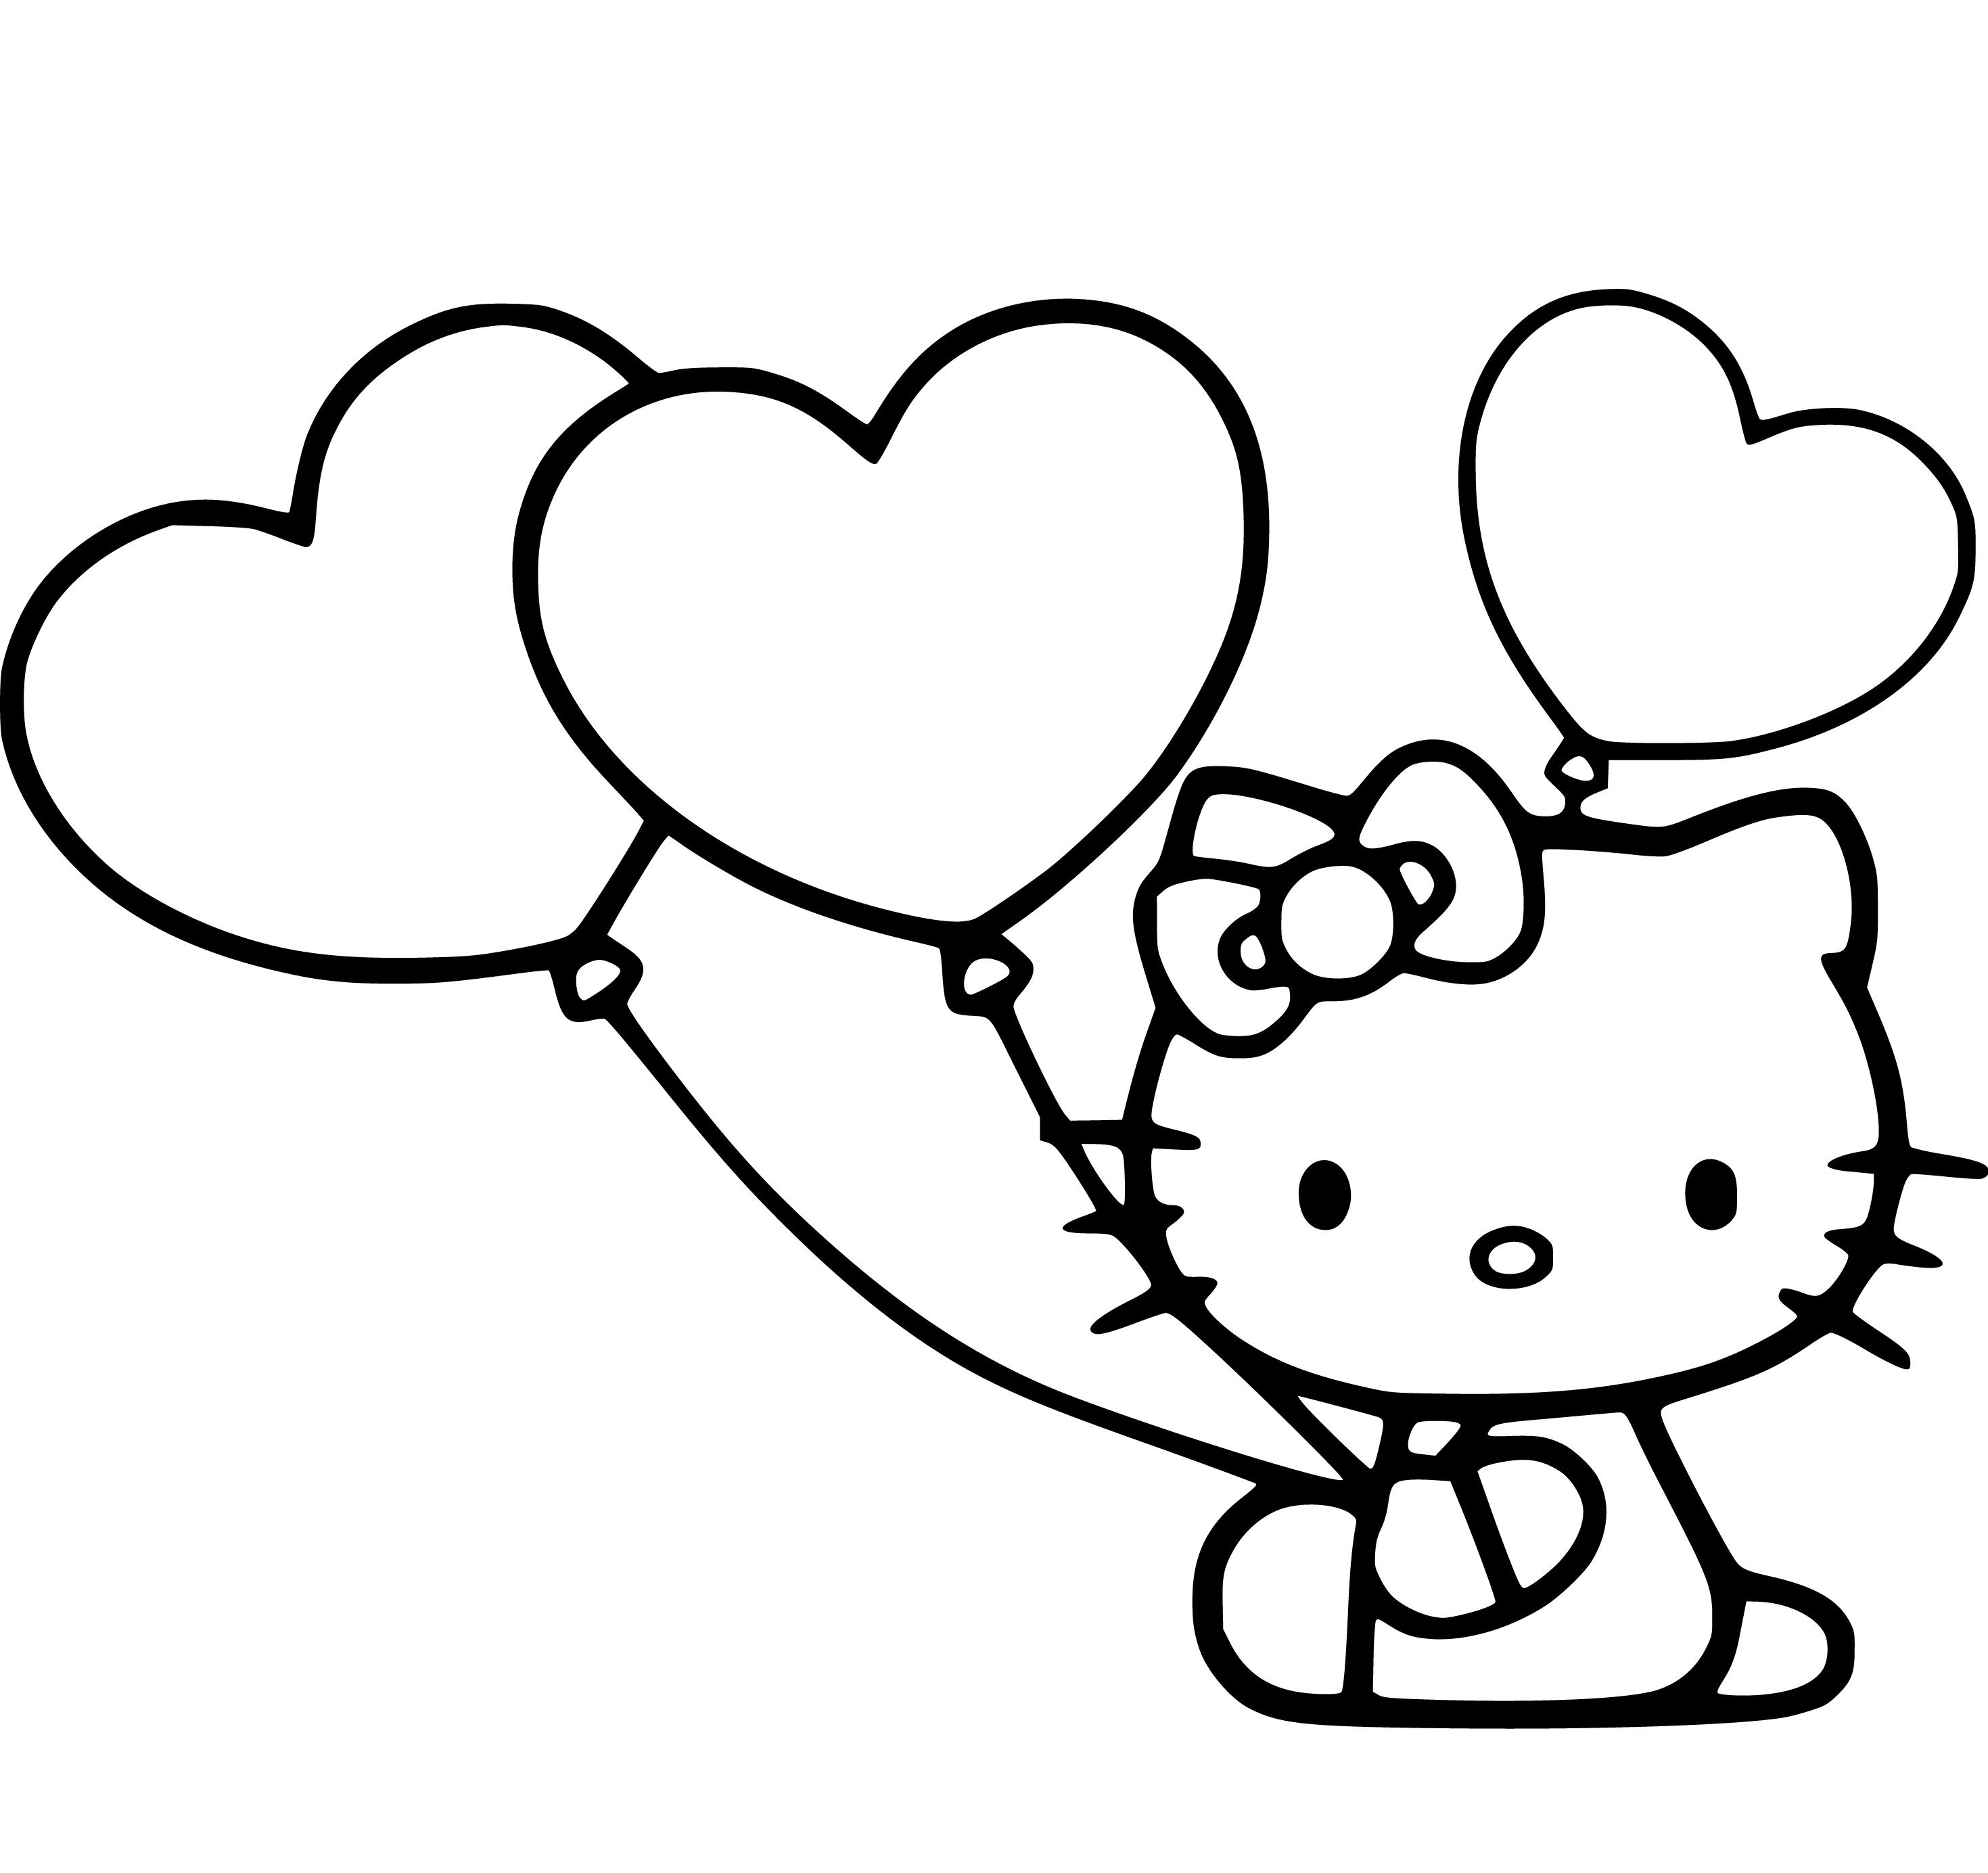 Printable Kitty with Baloons Coloring Page for kids.